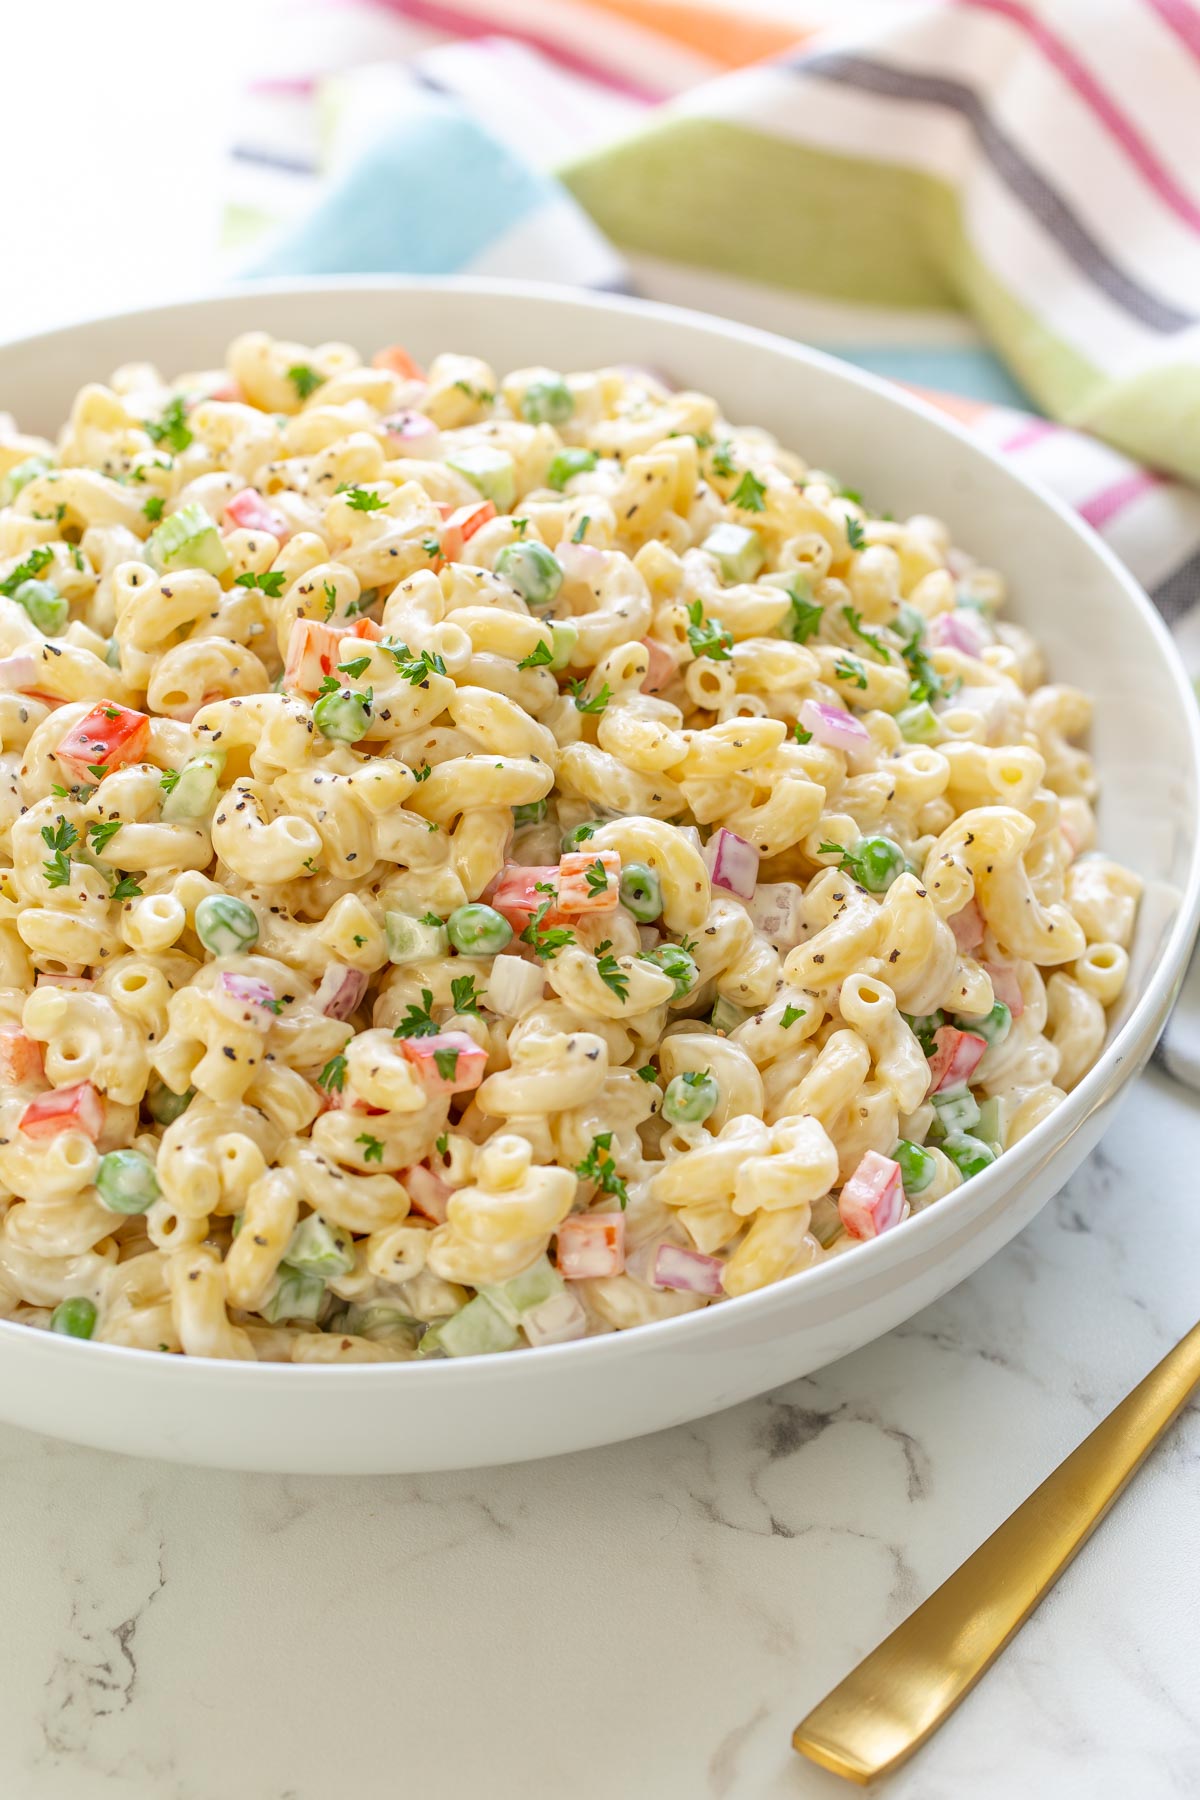 Front view of a bowl of macaroni salad by a gold serving spoon.